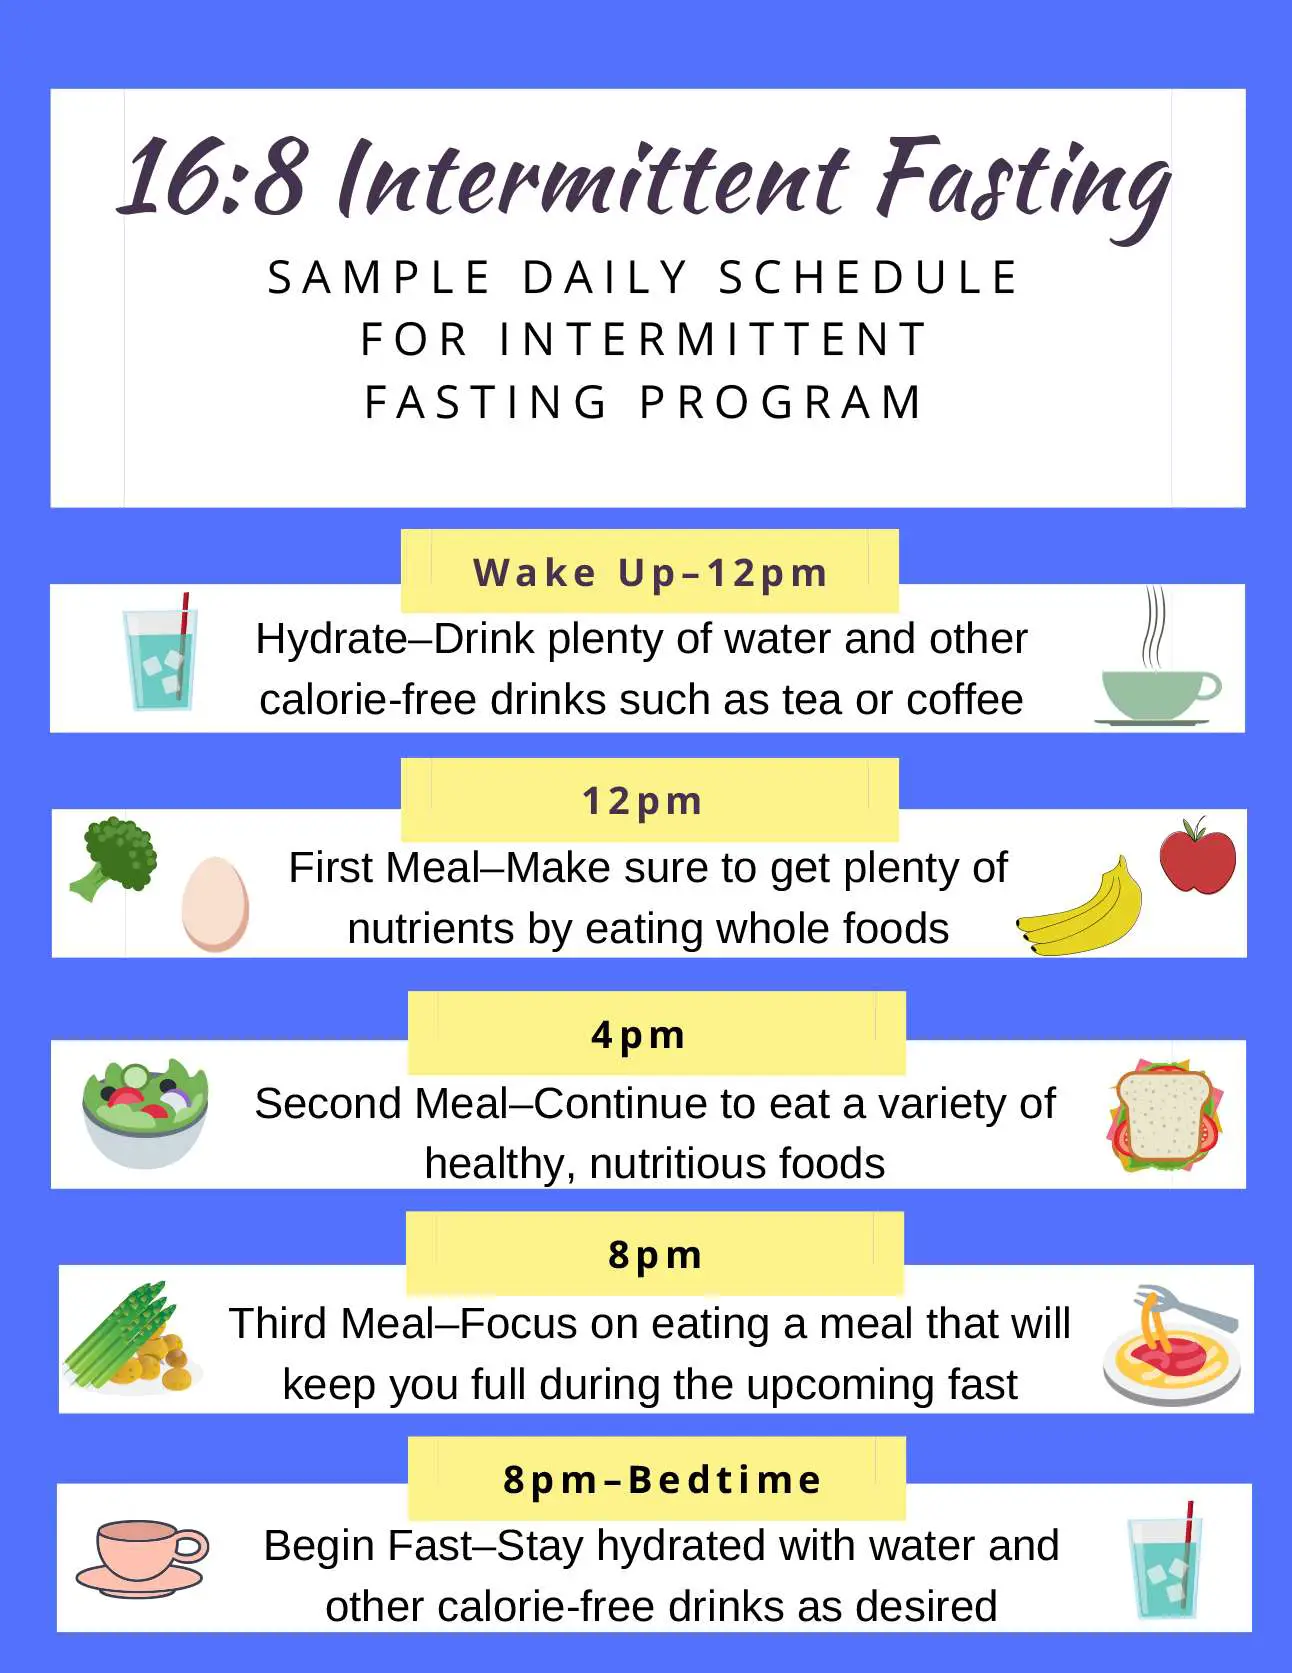 A Beginnerâs Guide to Intermittent Fasting